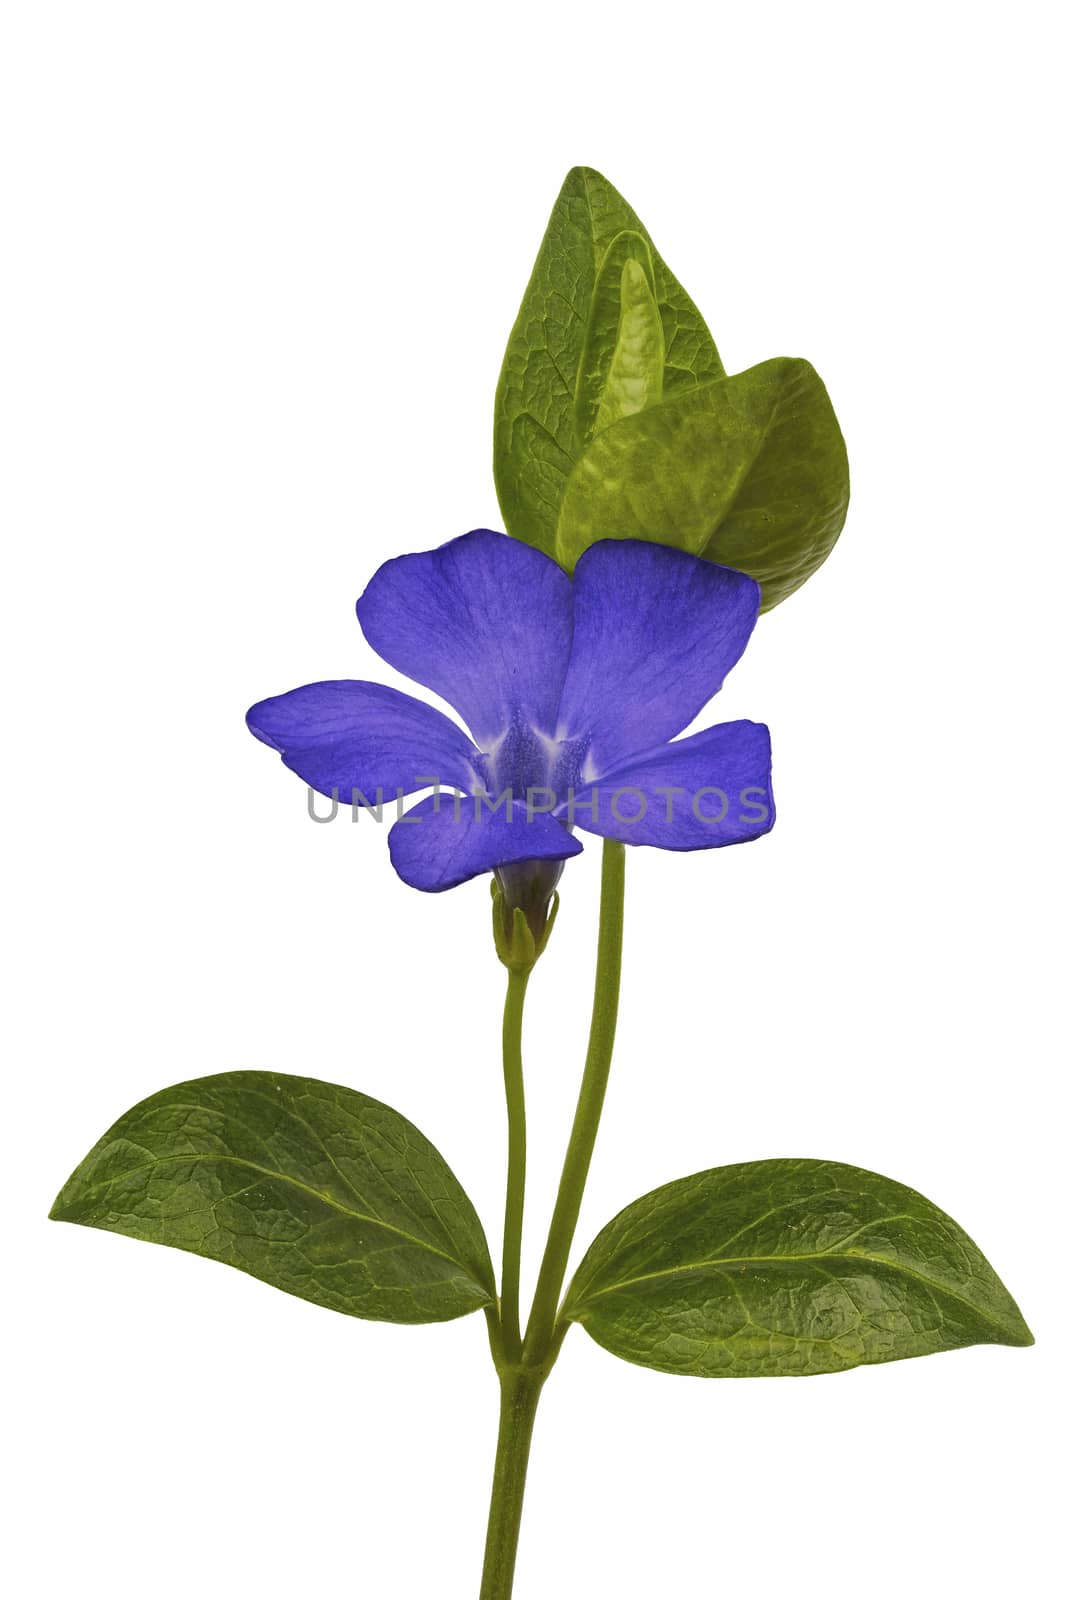 Periwinkle (Vincia) isolated on a white background